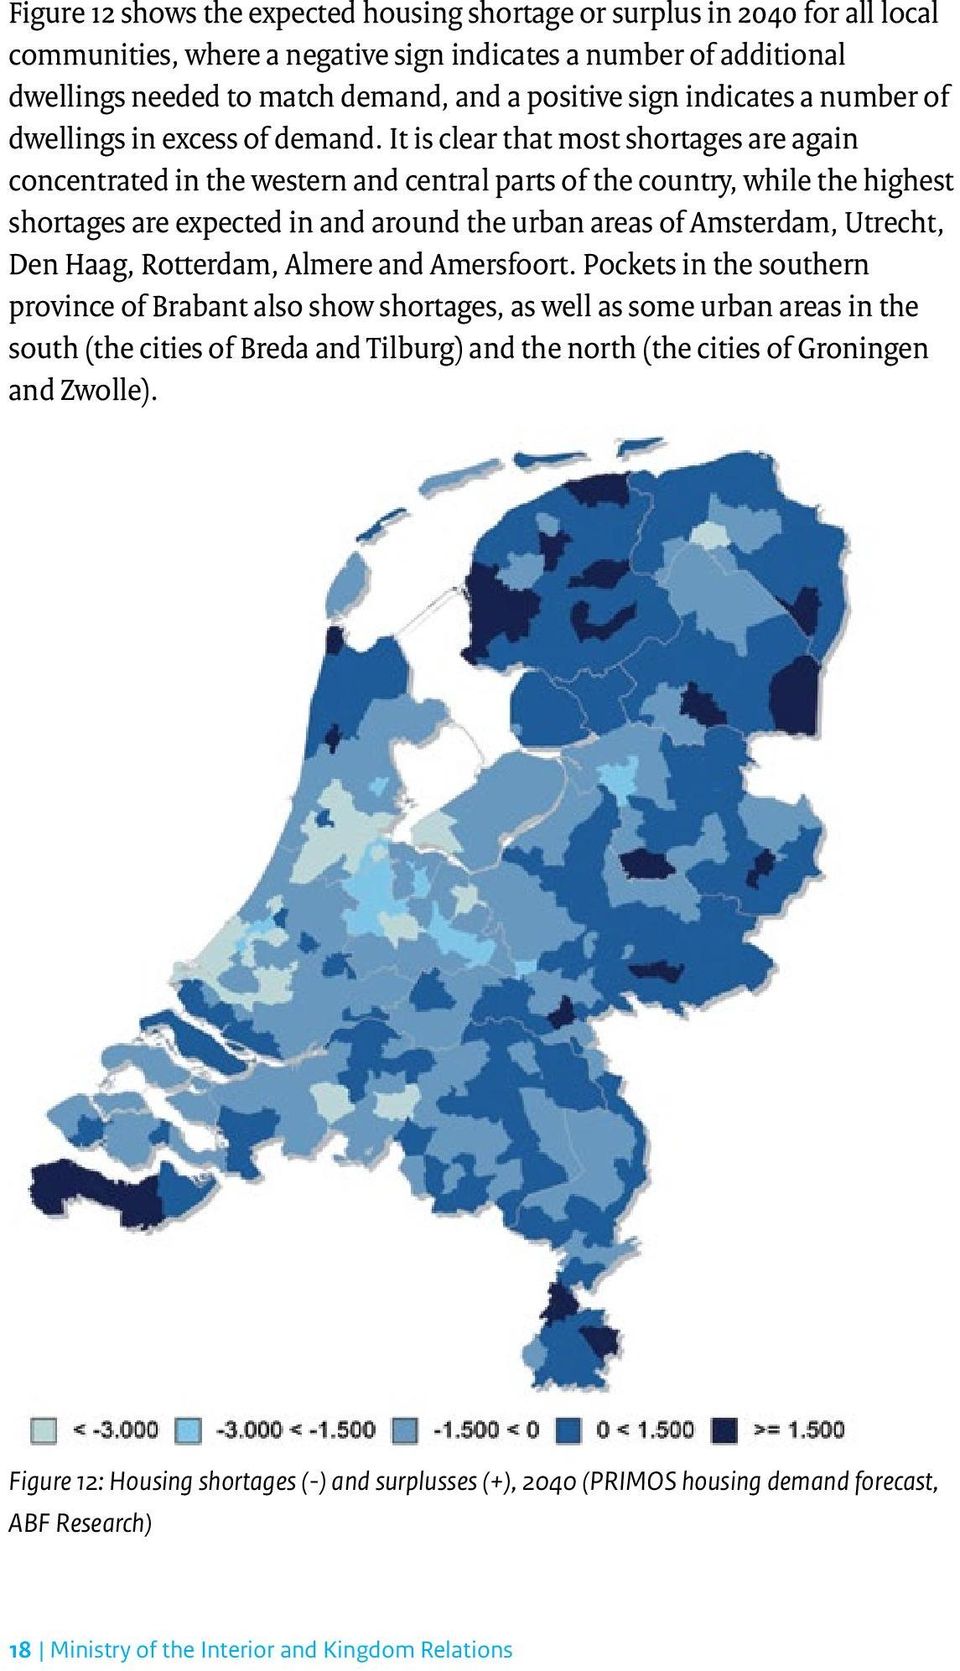 It is clear that most shortages are again concentrated in the western and central parts of the country, while the highest shortages are expected in and around the urban areas of Amsterdam, Utrecht,